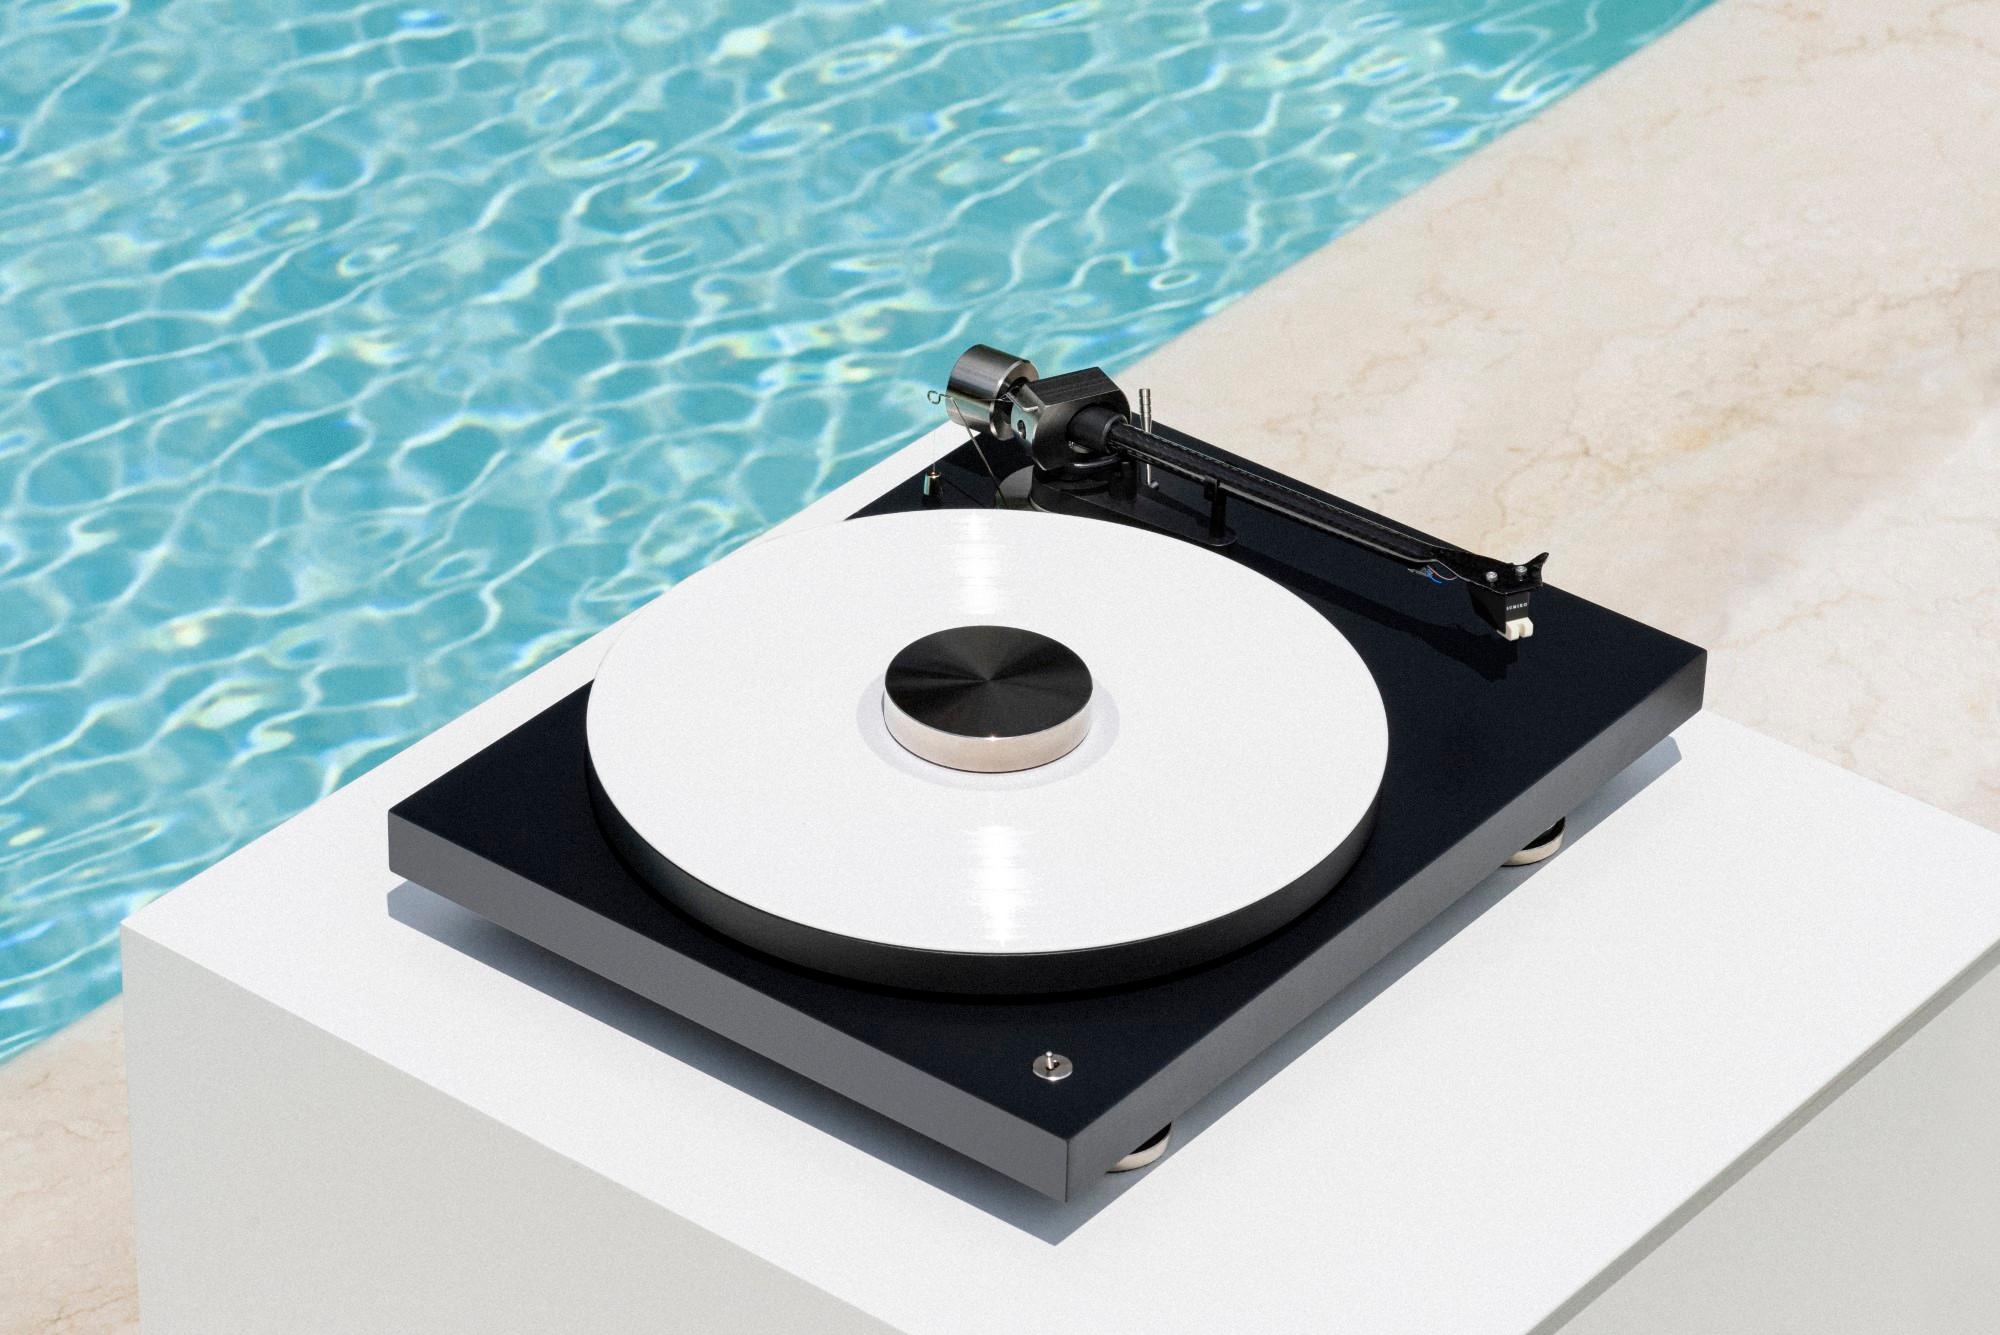 You won't mistake this turntable for any other! f6e2786d debut prorainier lifestyle 13